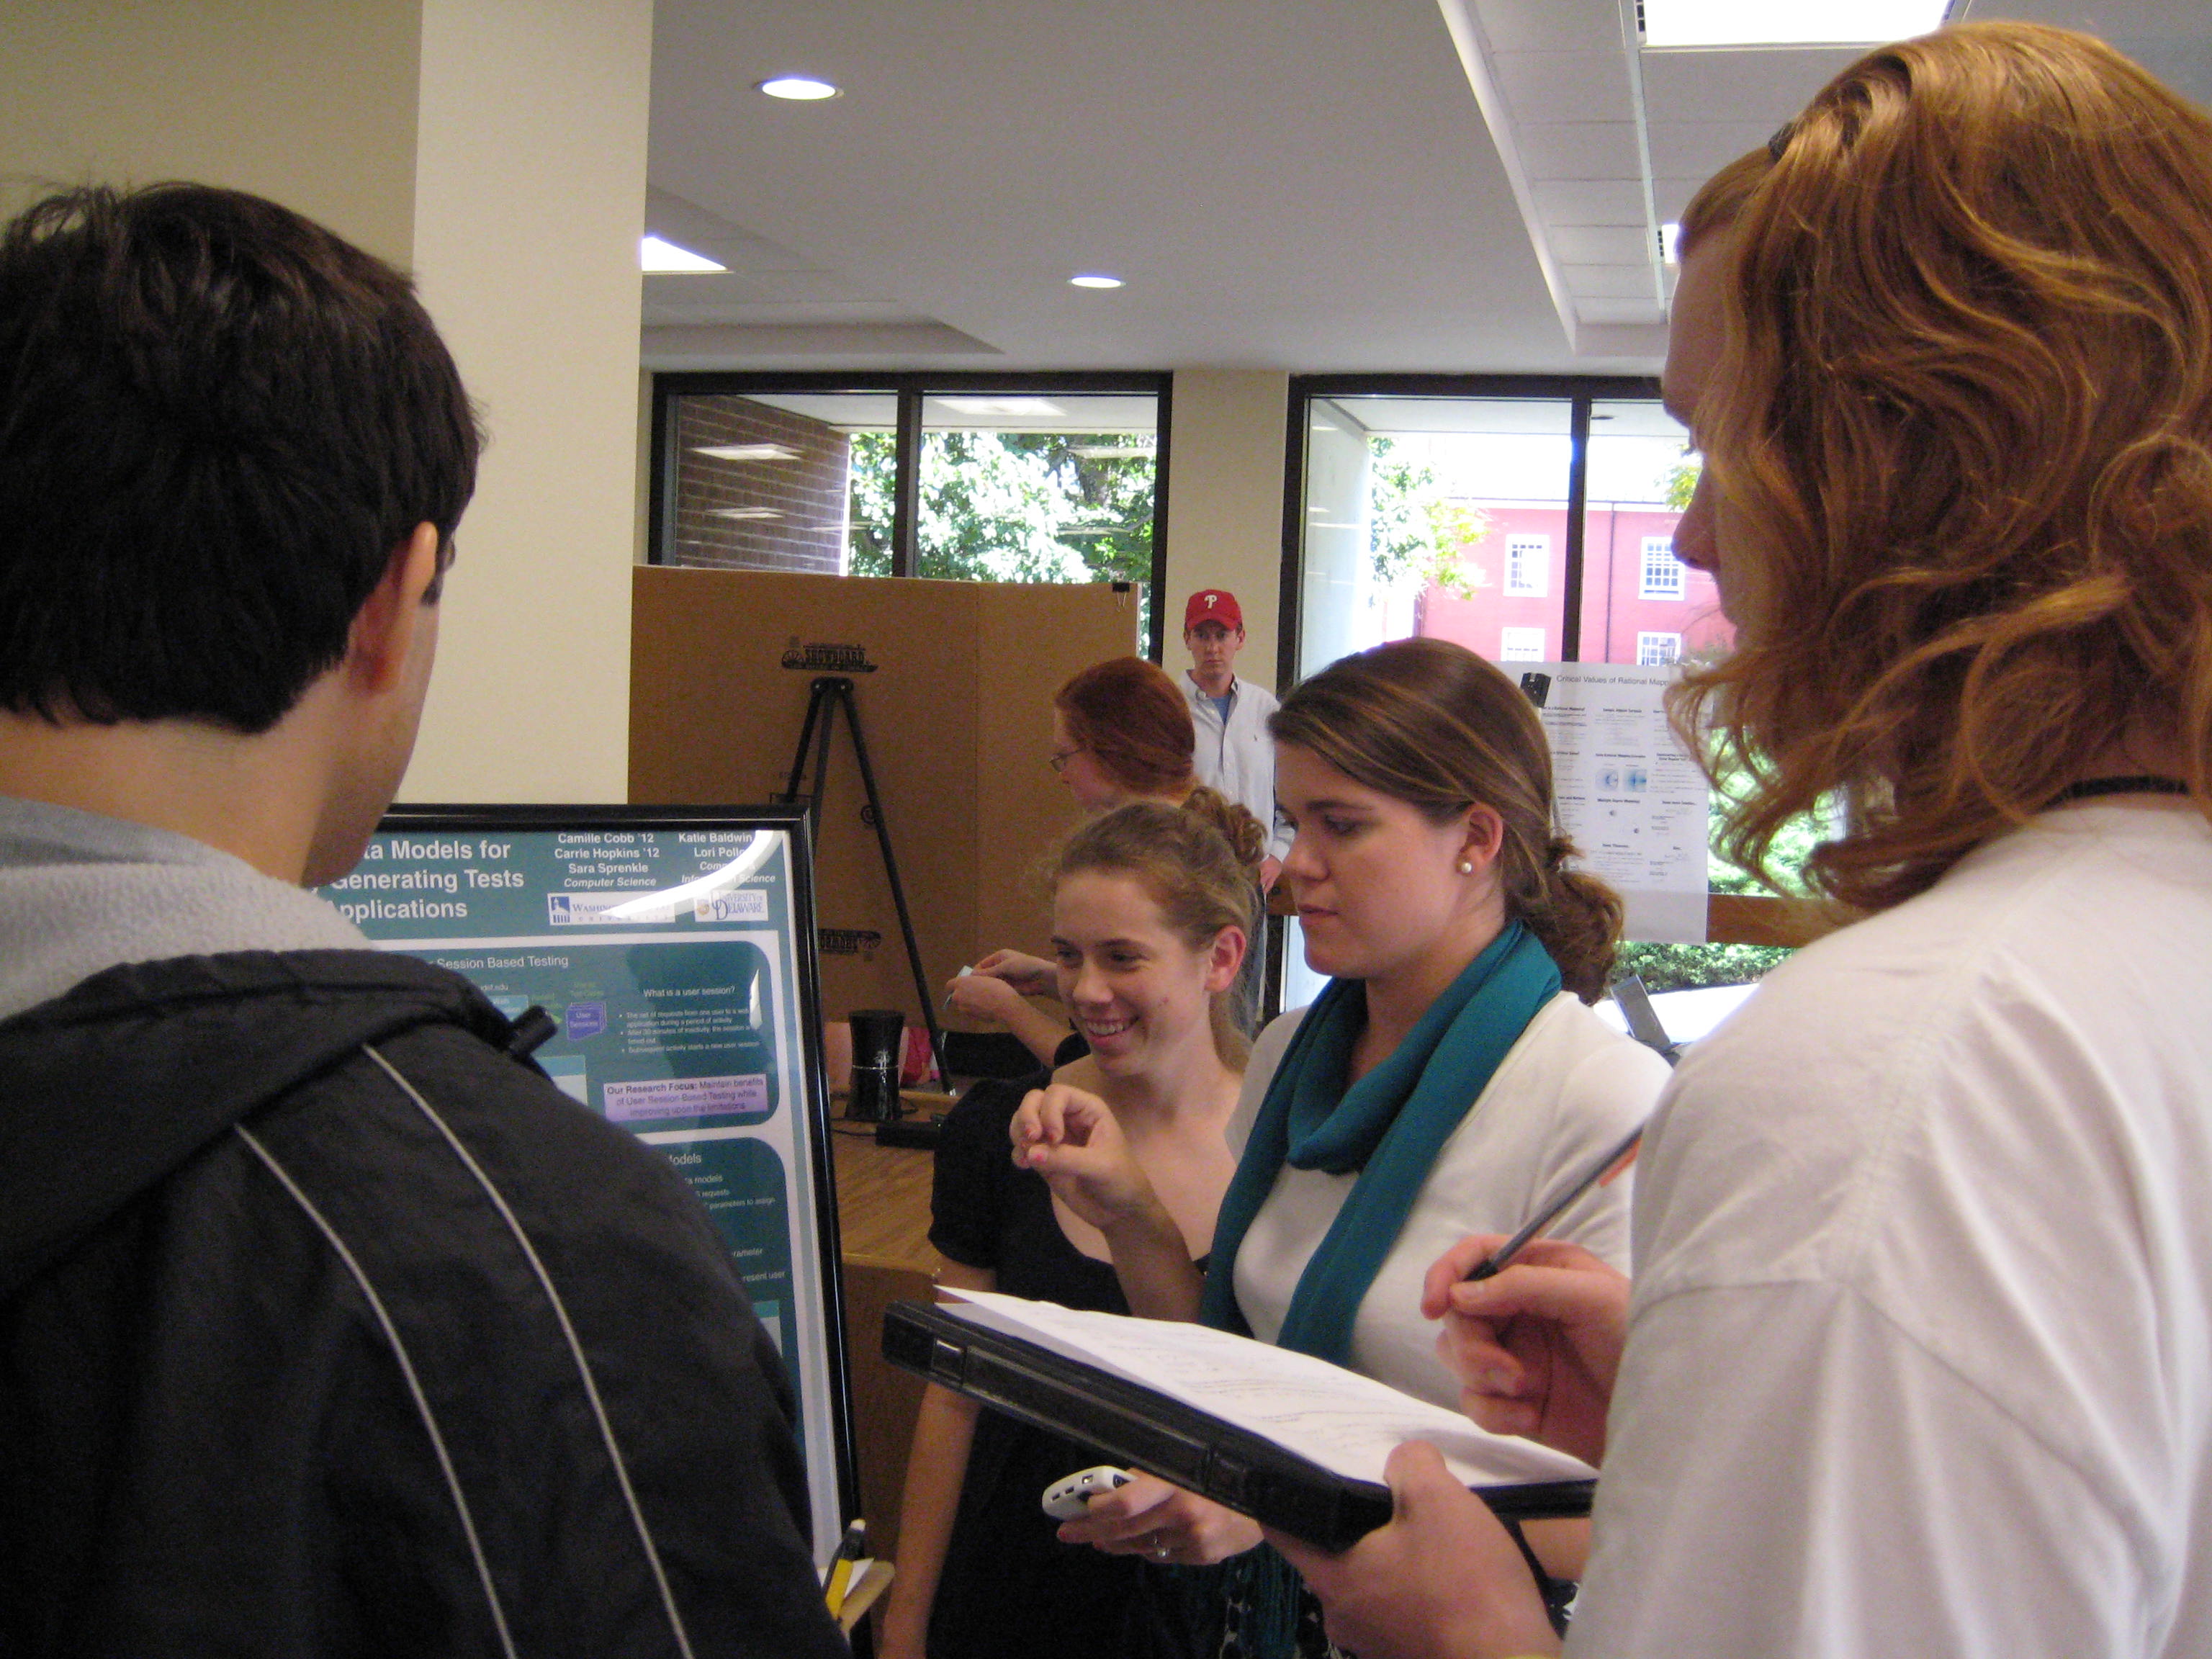 Camille and Carrie (center) present their research to computer science students, David (l) and Levi (r).